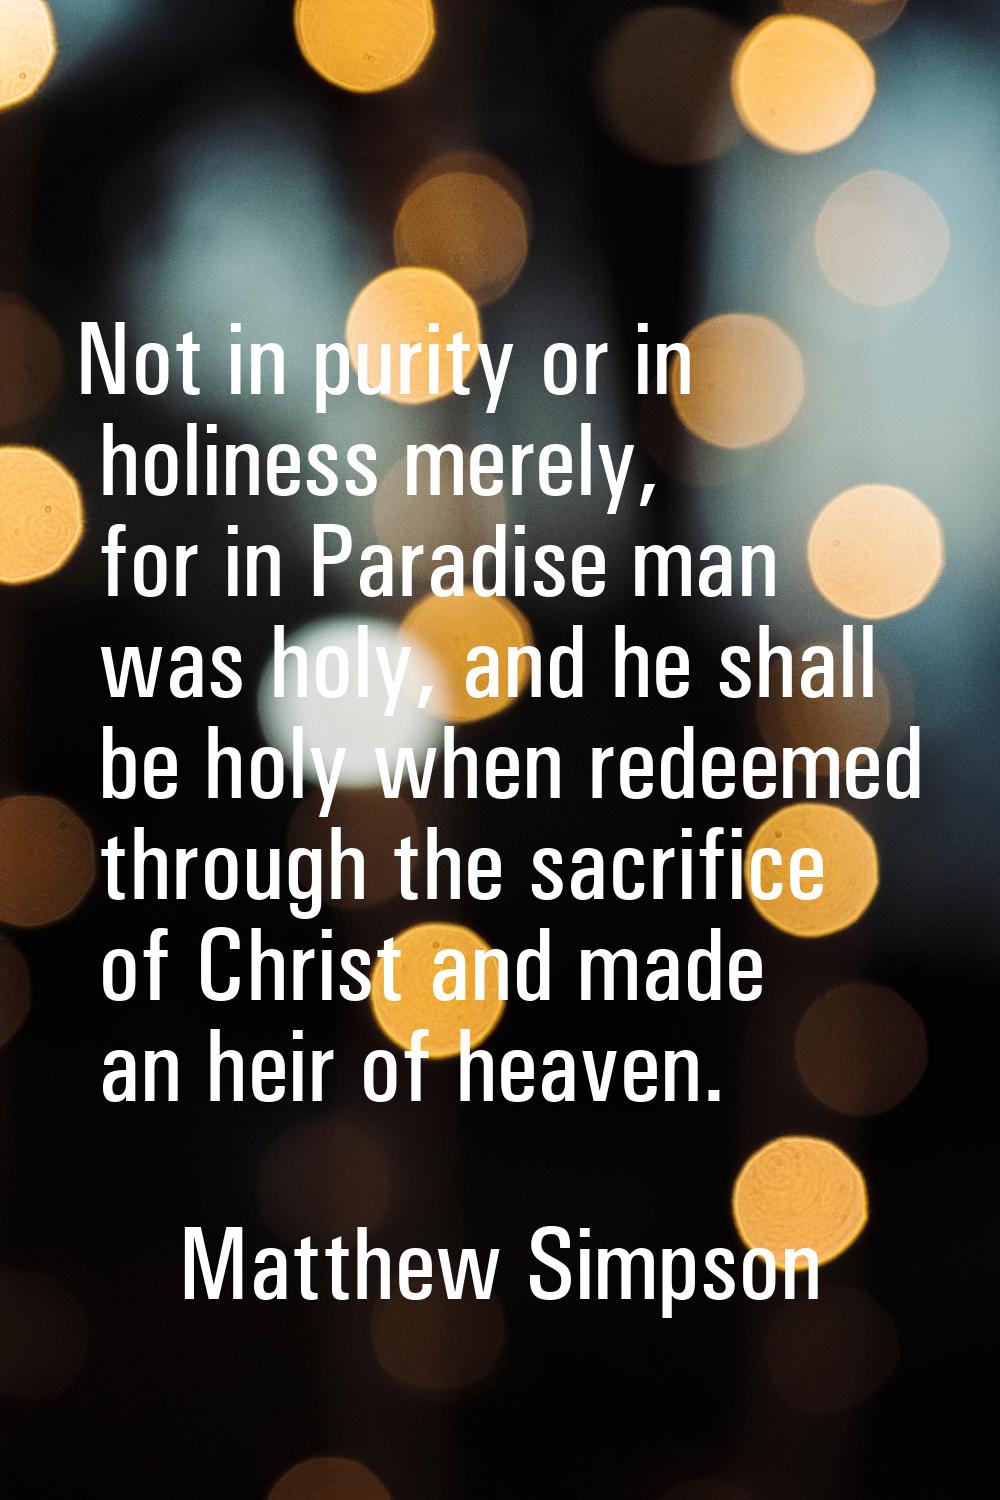 Not in purity or in holiness merely, for in Paradise man was holy, and he shall be holy when redeem